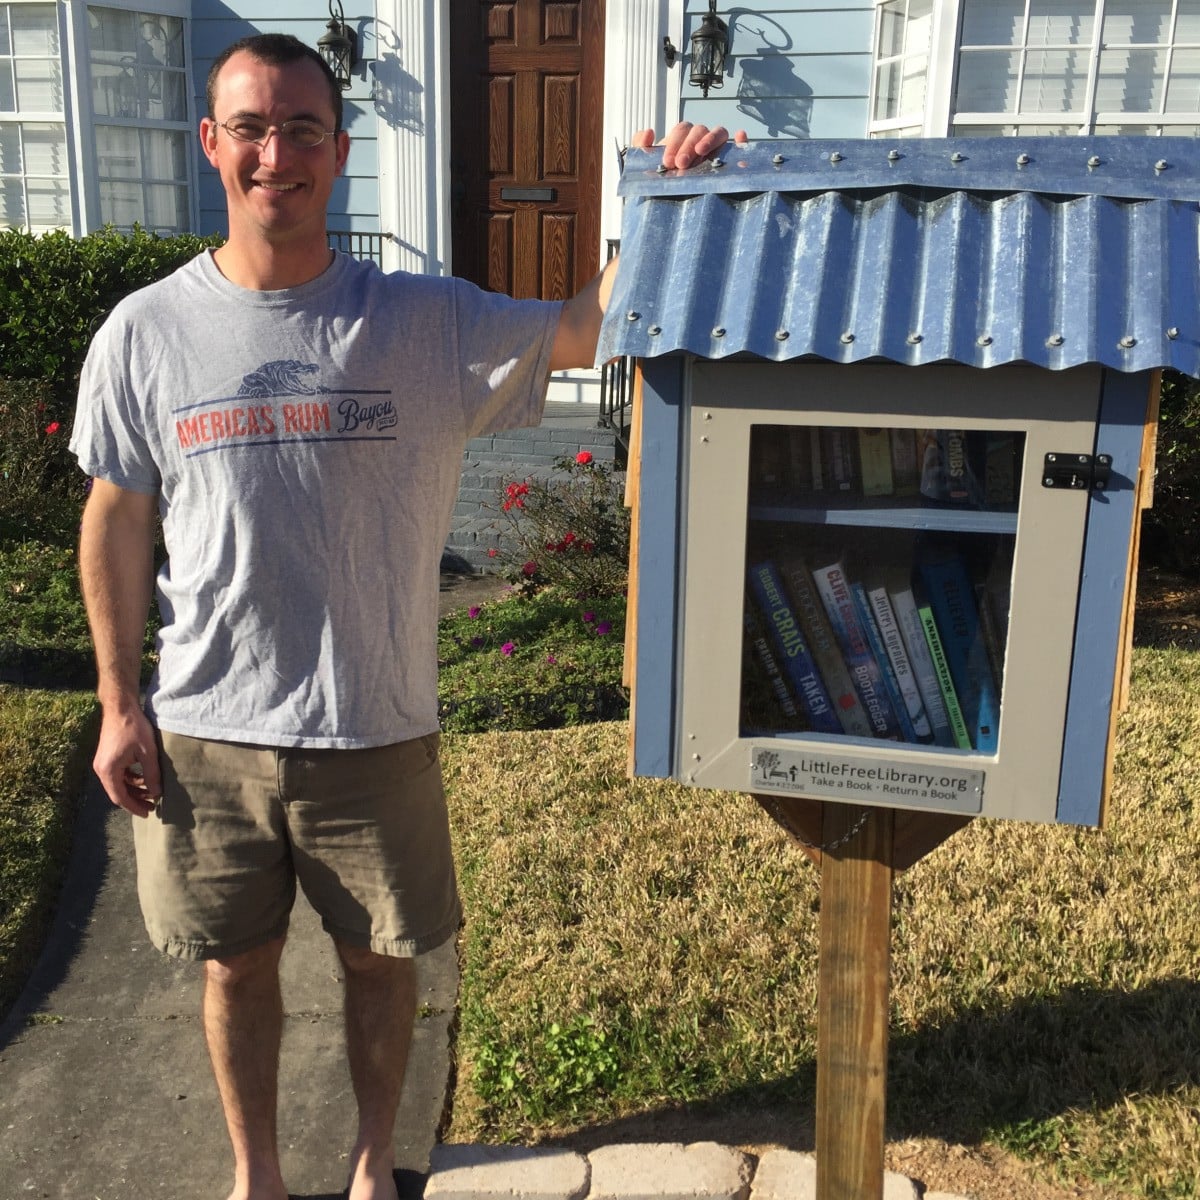 Joe Torcivia with the library box in front of his home on Woodruff.